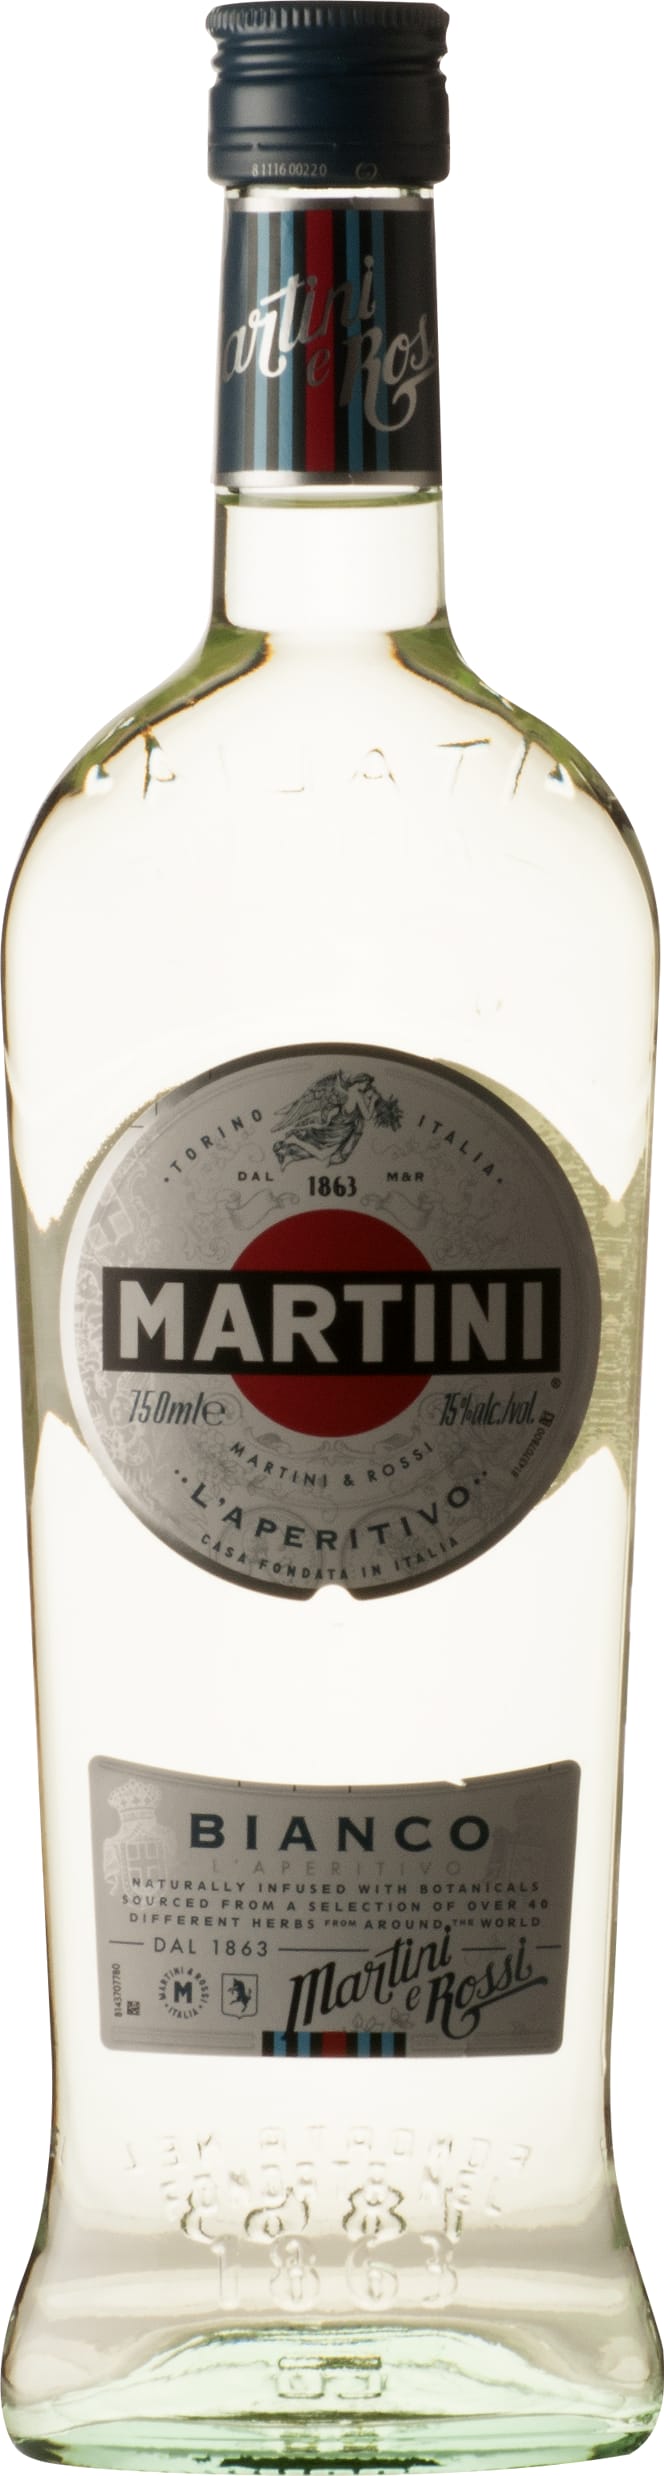 Martini Bianco NV 75cl NV - Buy Martini Wines from GREAT WINES DIRECT wine shop